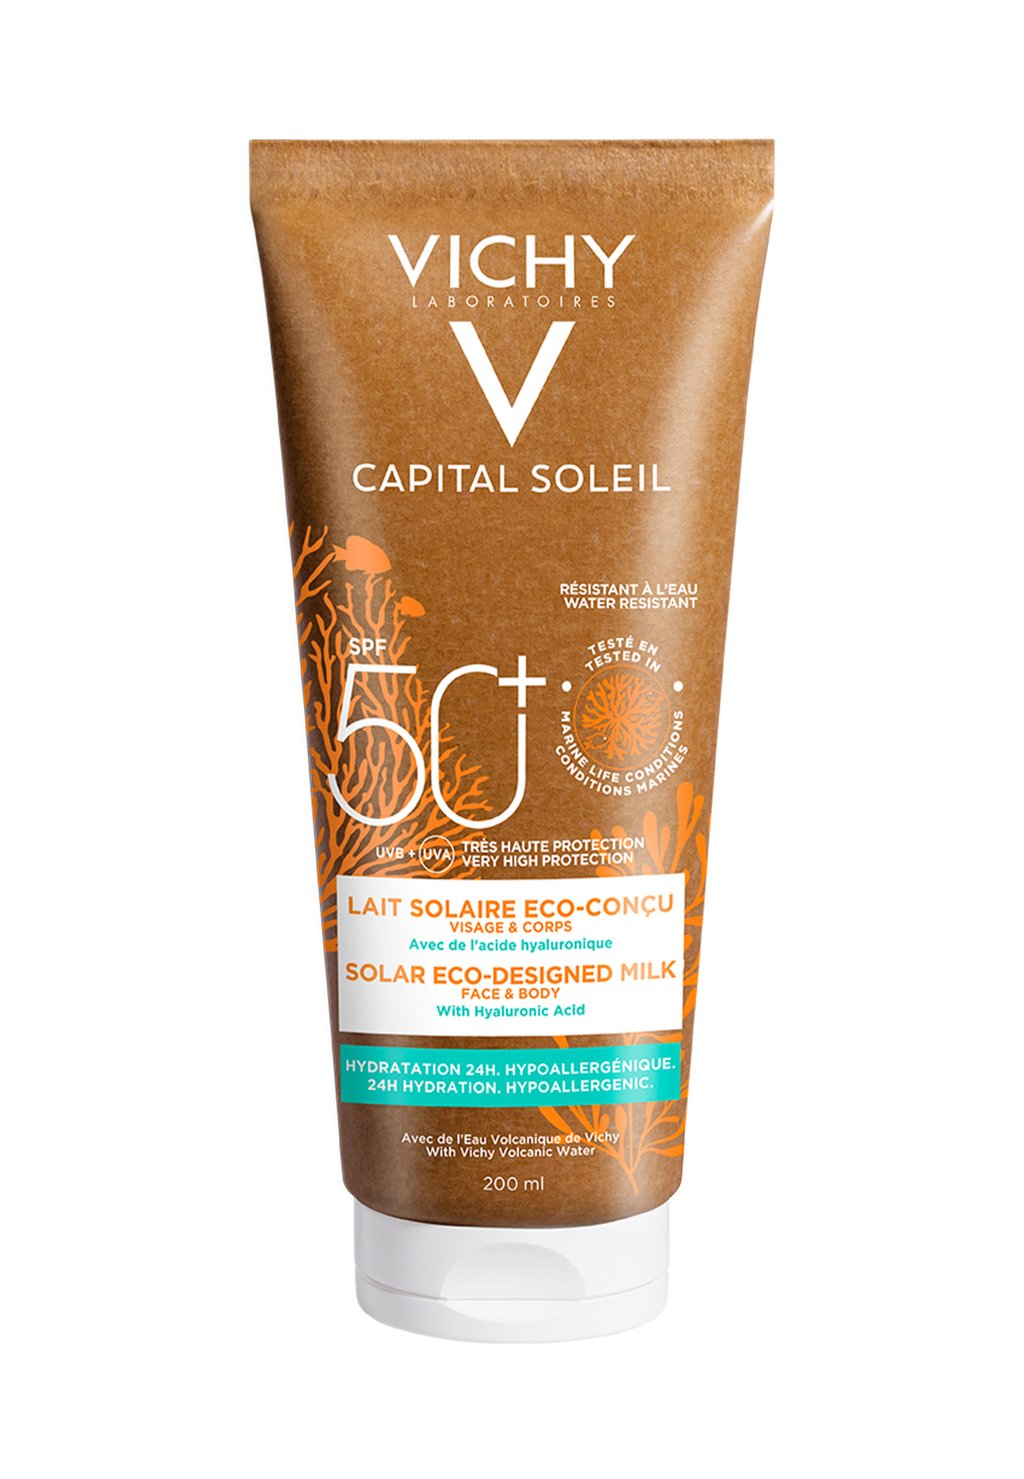 Защита от солнца SUN CARE VICHY CAPITAL SOLEIL FEUCHTIGKEITSSPENDENDE SONNENMILCH LSF50+